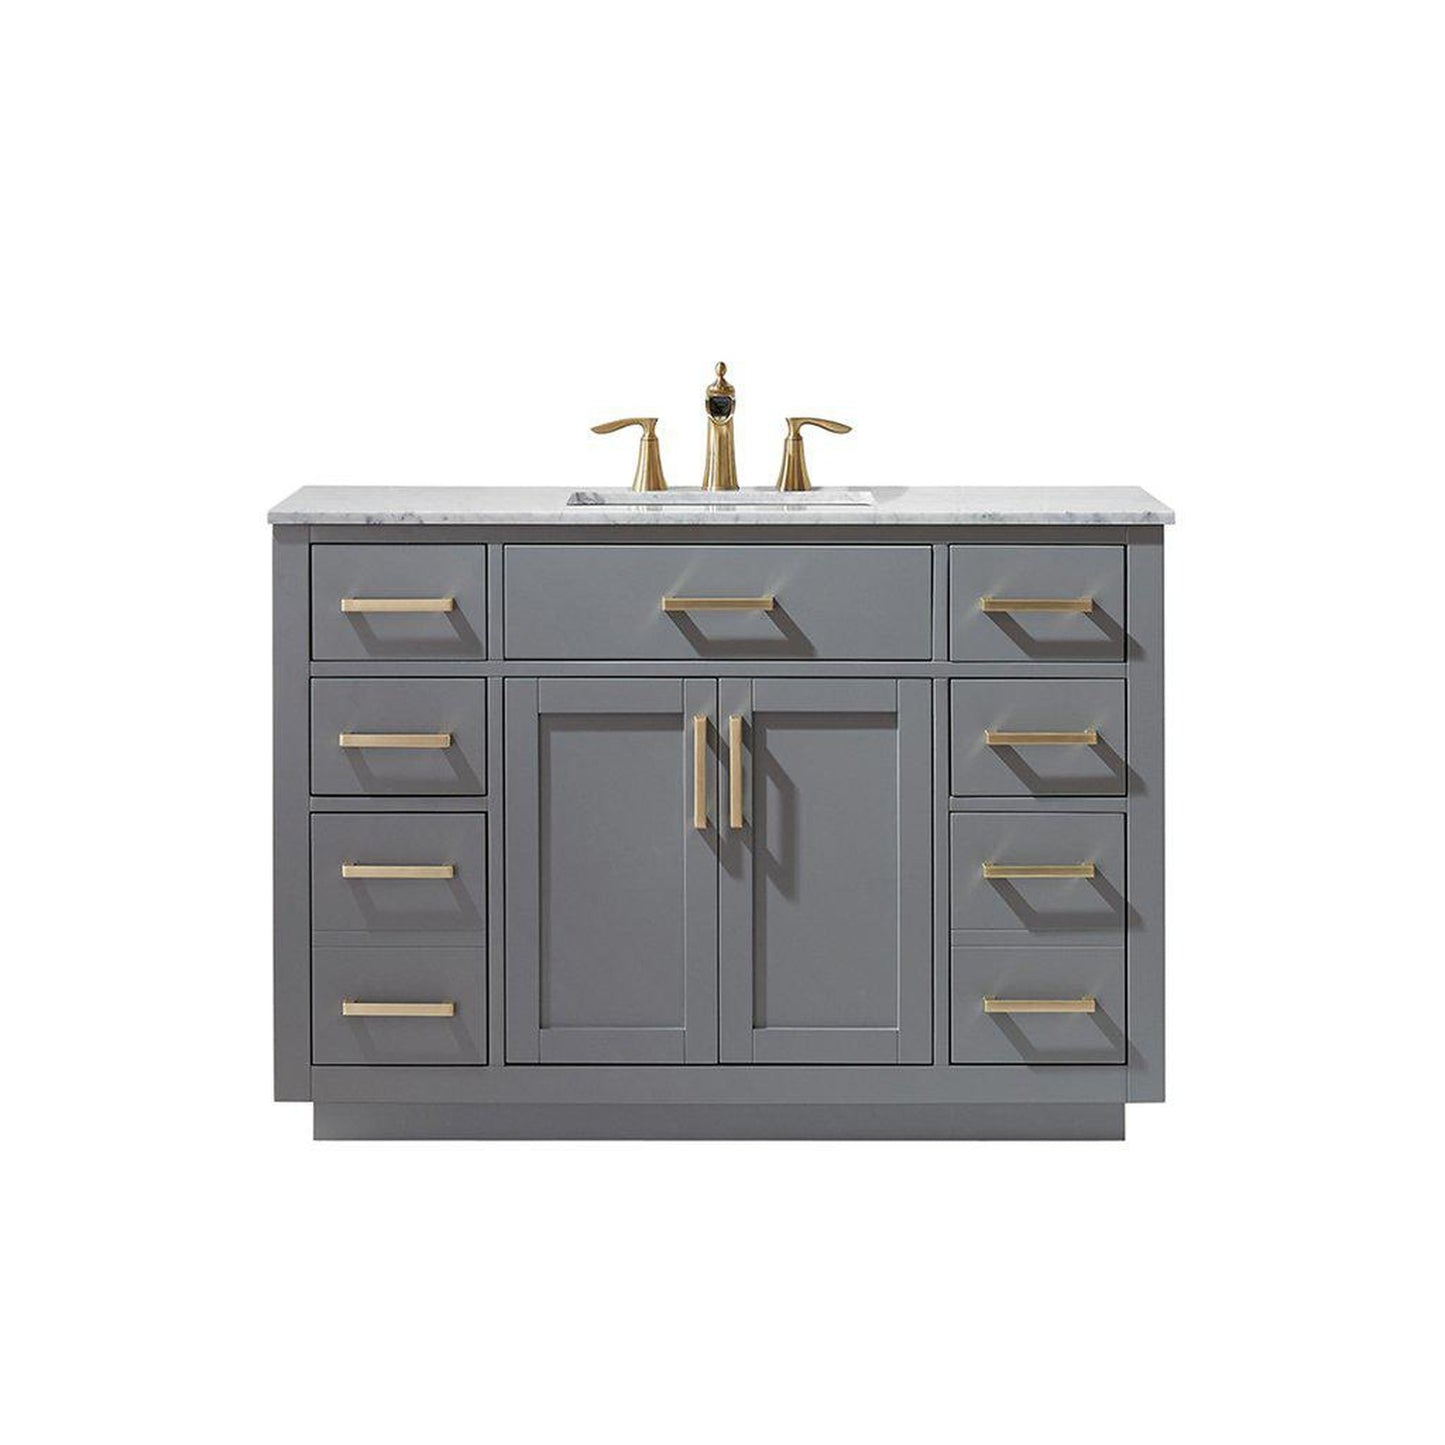 Altair Ivy 48" Single Gray Freestanding Bathroom Vanity Set With Natural Carrara White Marble Top, Rectangular Undermount Ceramic Sink, and Overflow